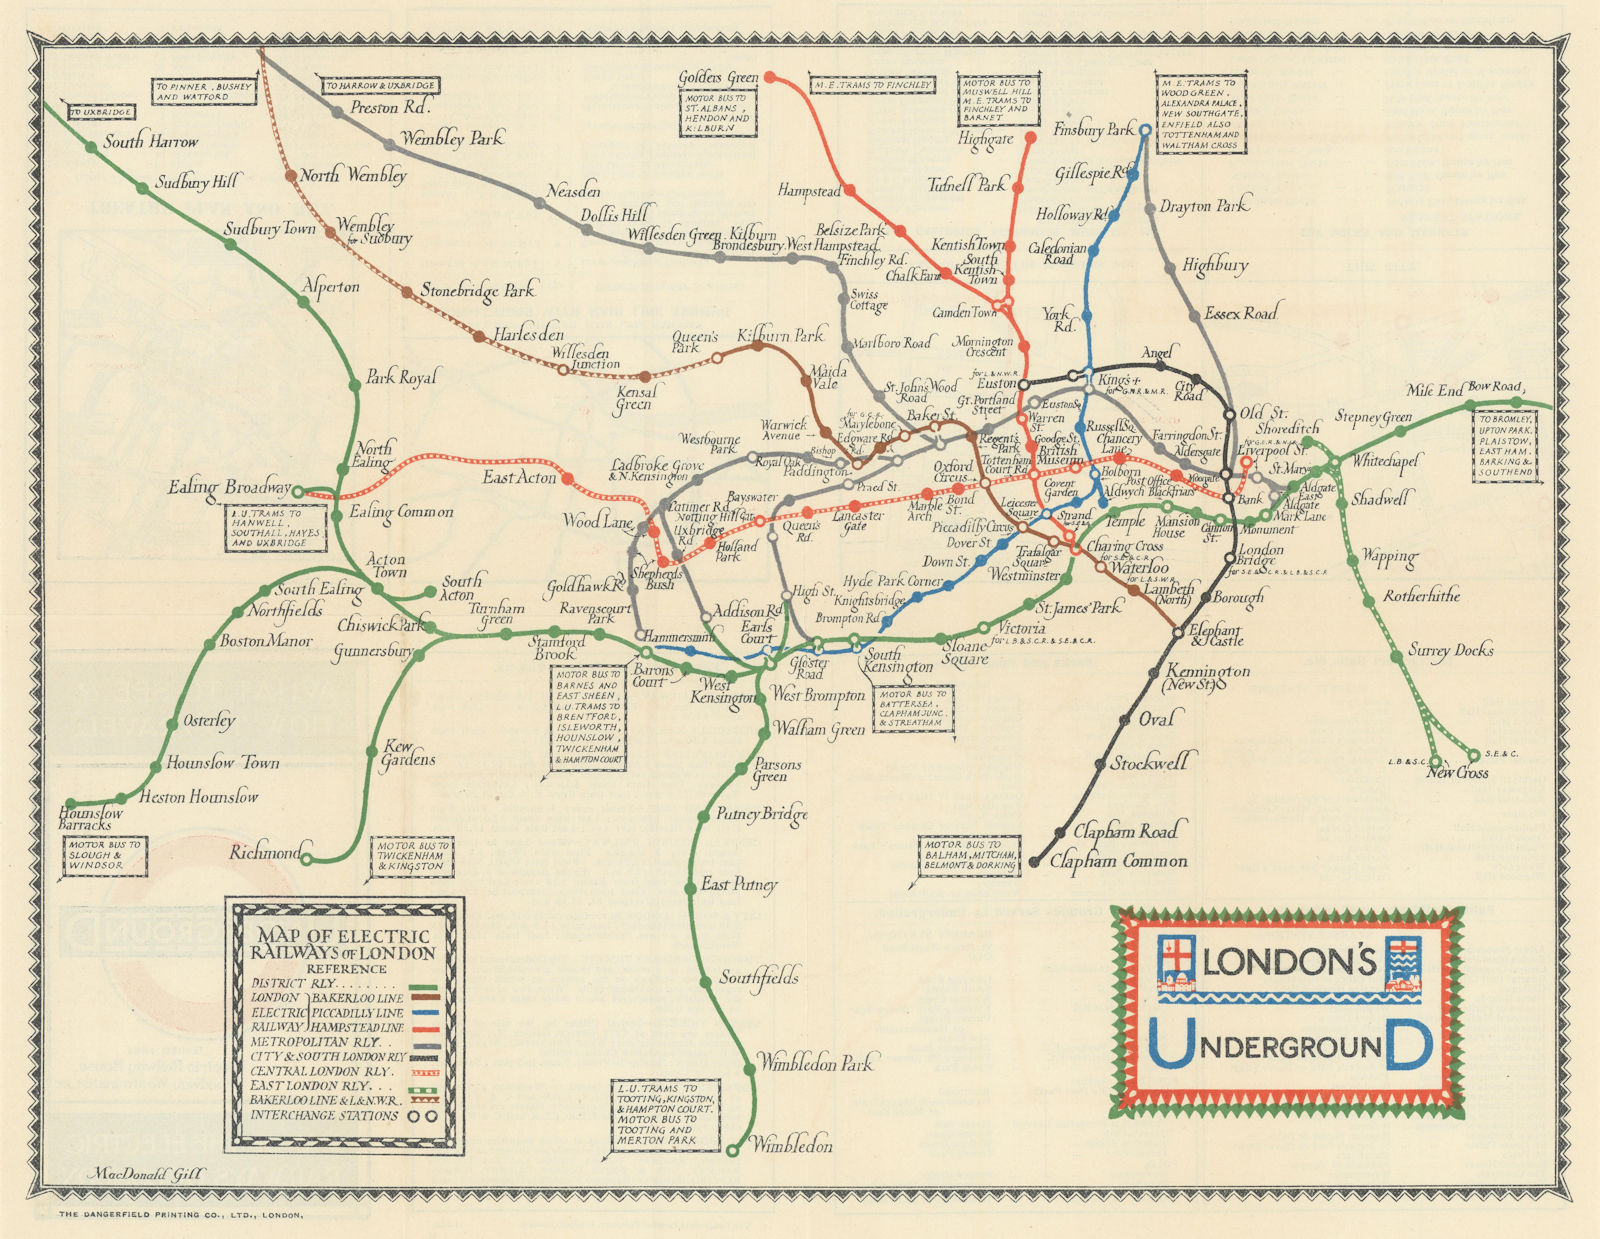 London's Underground. What to See/How to Travel. Macdonald Gill. March 1922 map